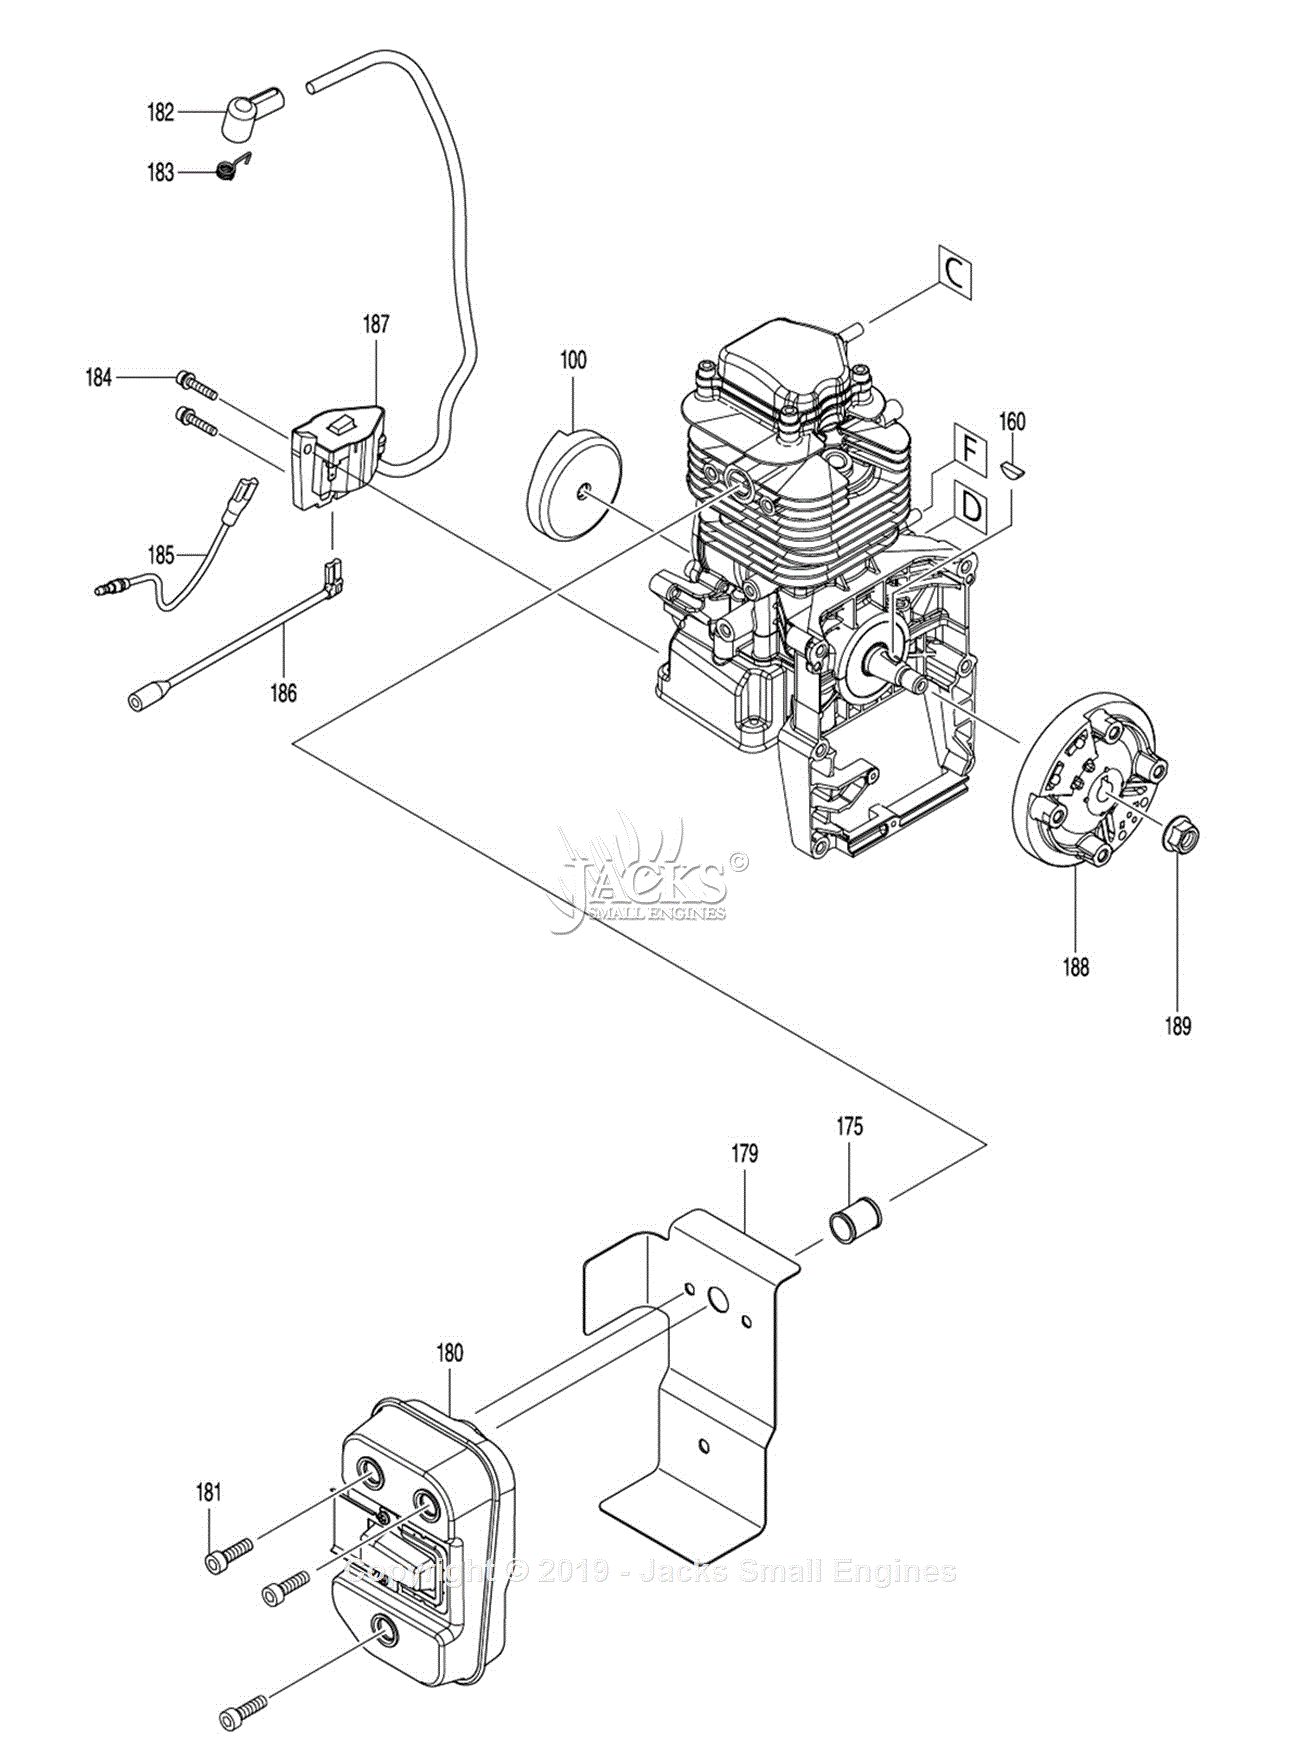 Logisch Vaardigheid Pennenvriend Makita EB5300TH Parts Diagram for 5 - Ignition Coil, Muffler